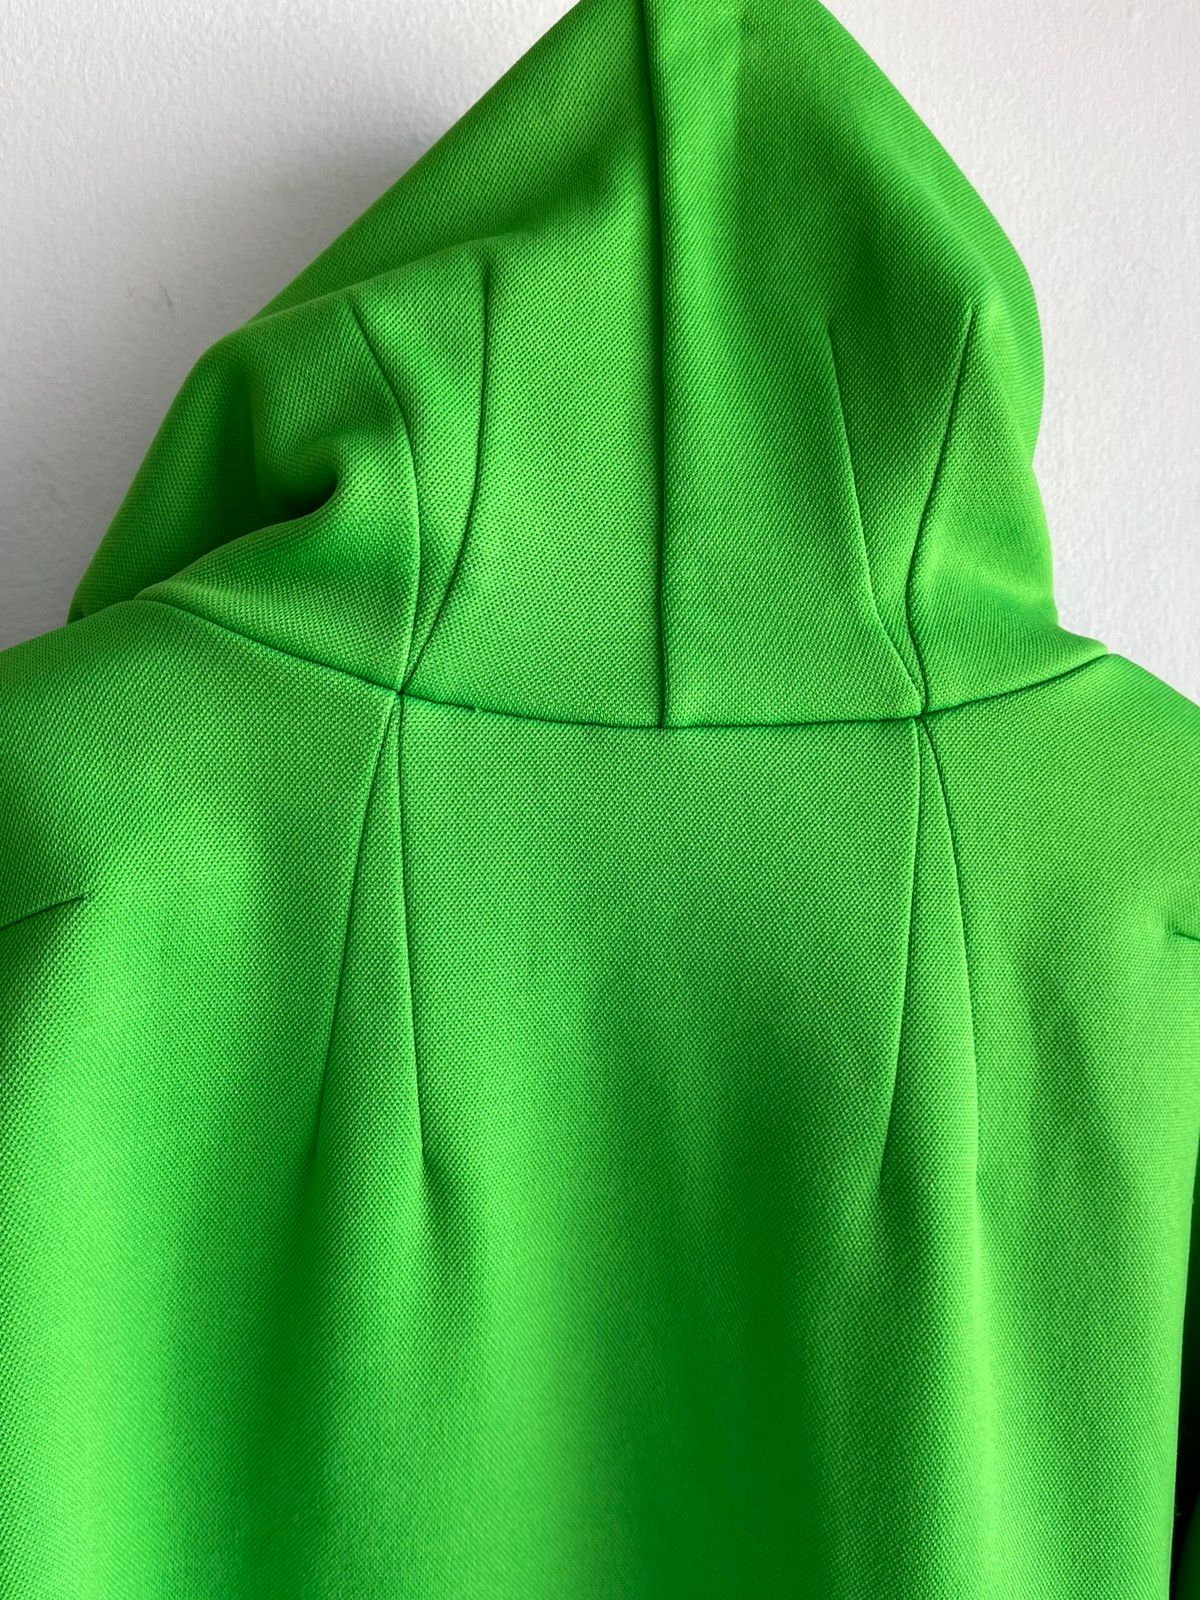 DH AW03 Luster Neon Lime Green Runway Hoodie LARGE